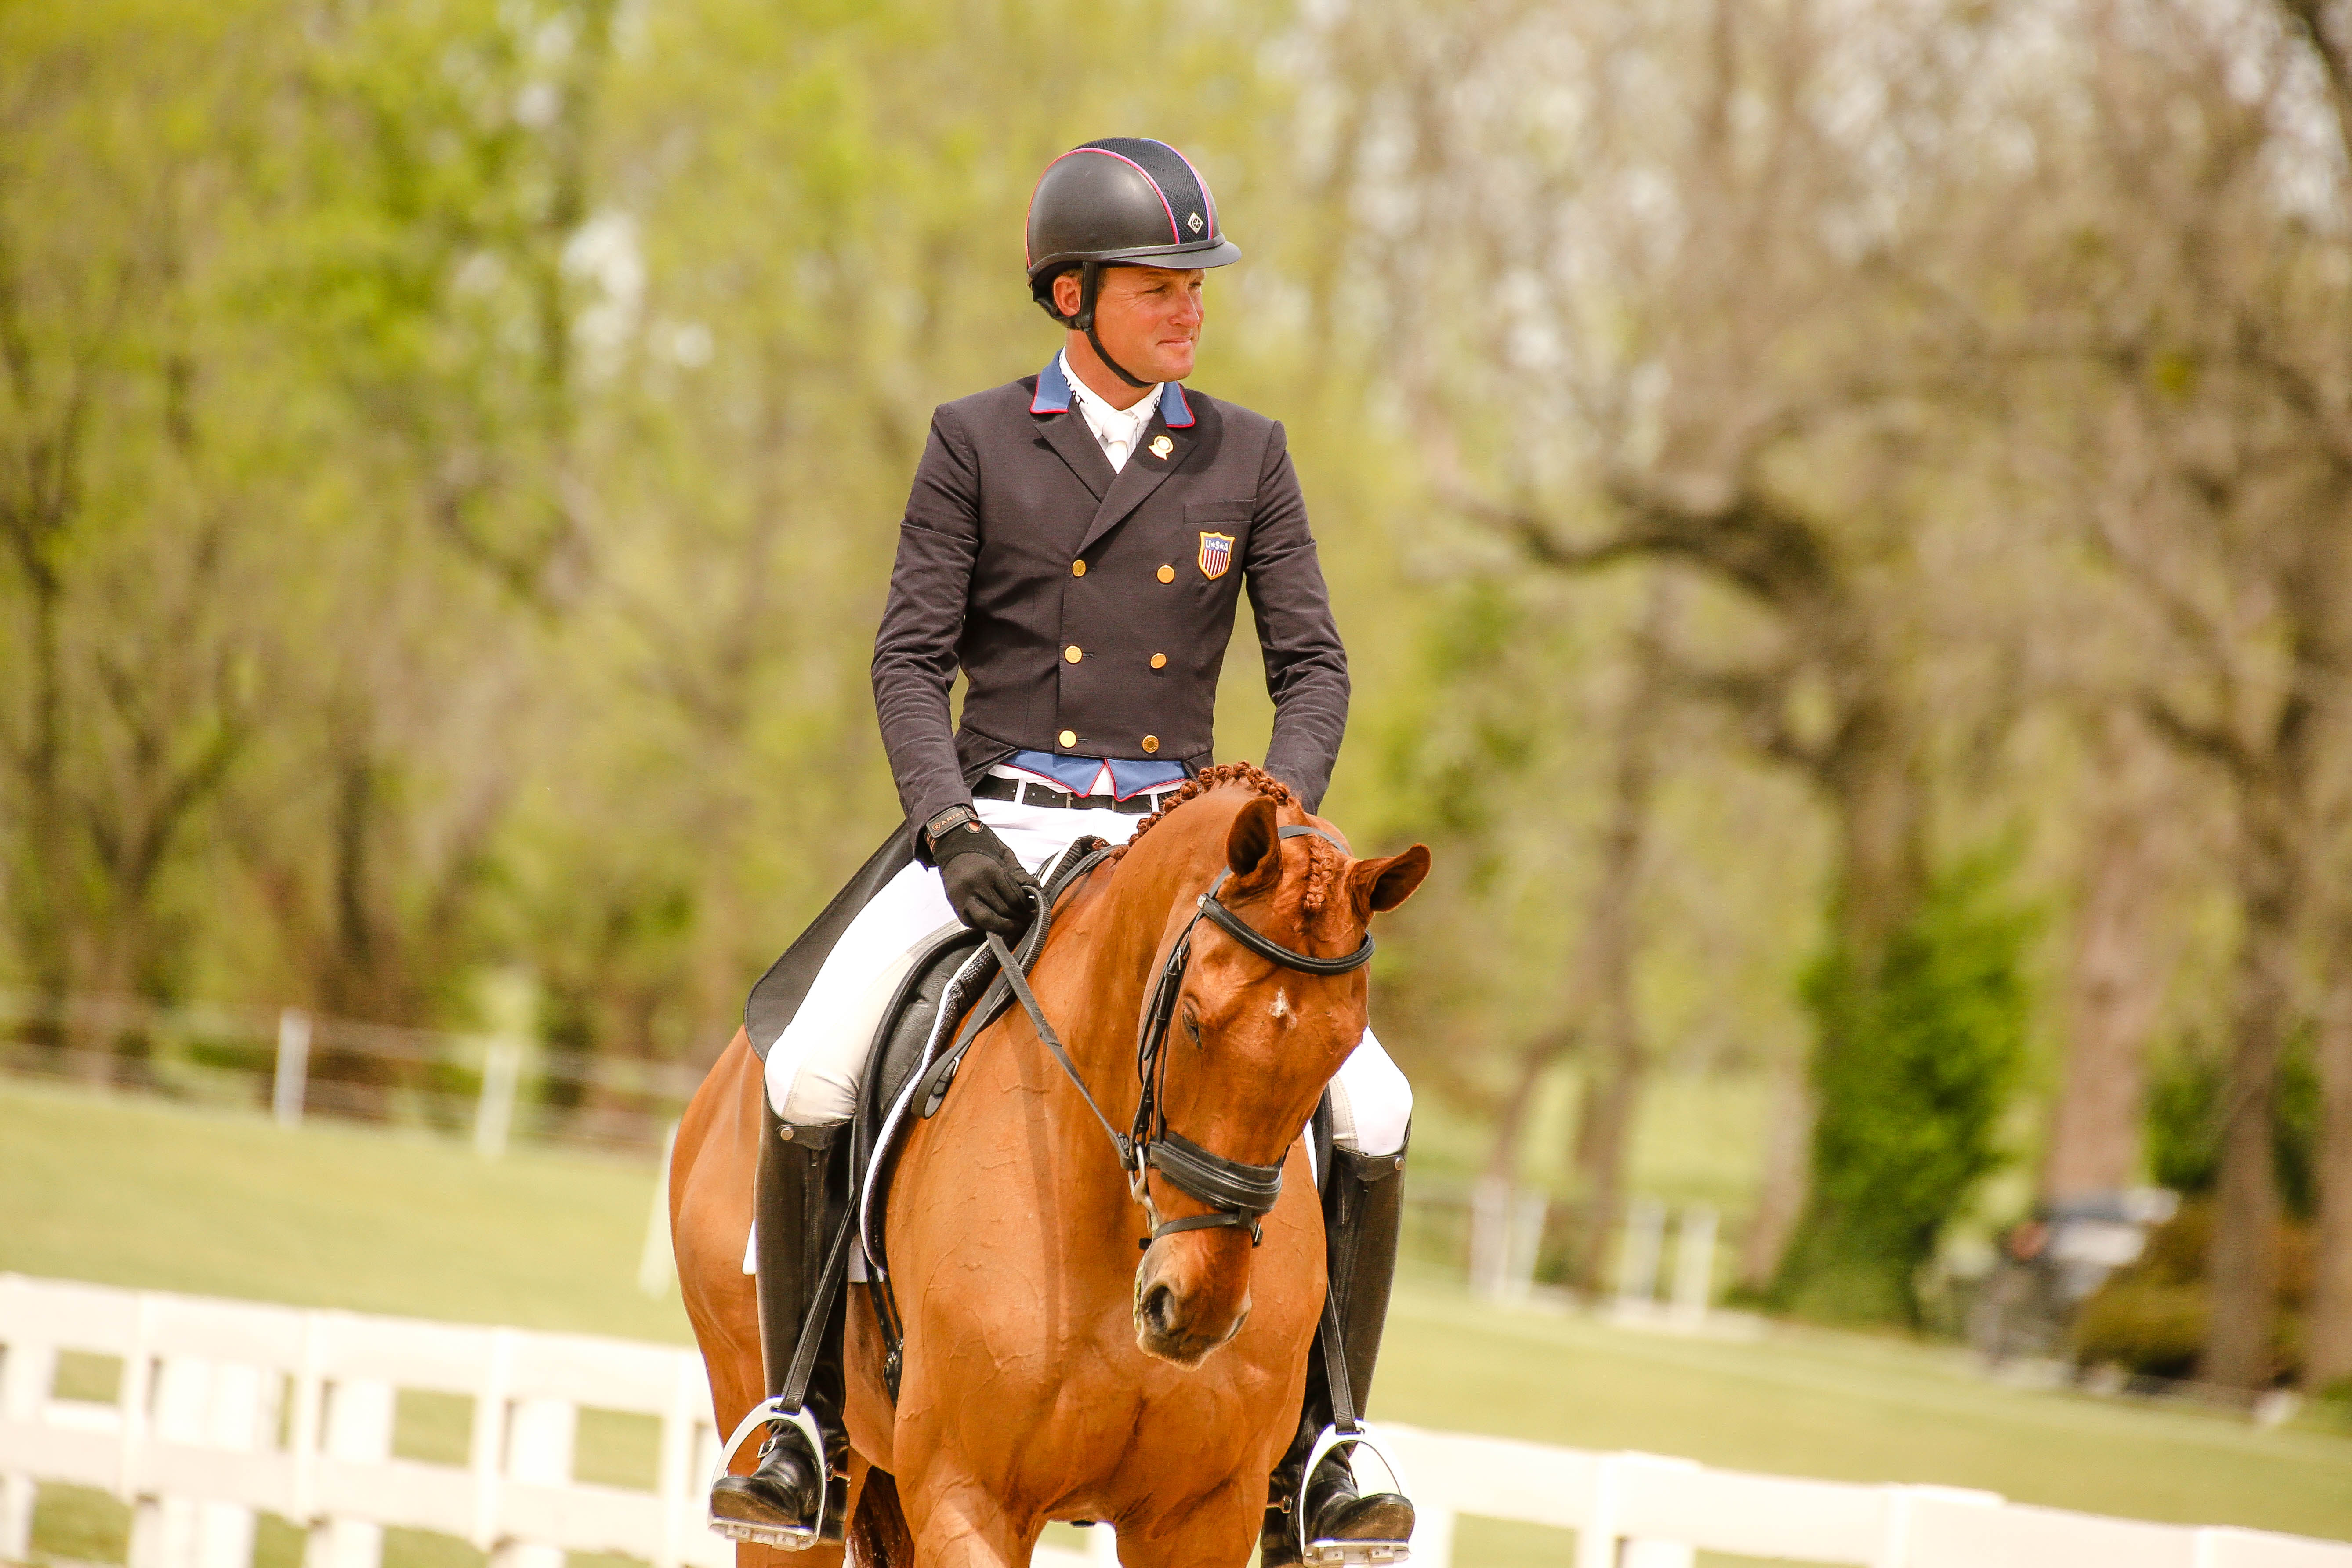 The partnership on dressage duty. Photo: Thoroughbred Aftercare Alliance